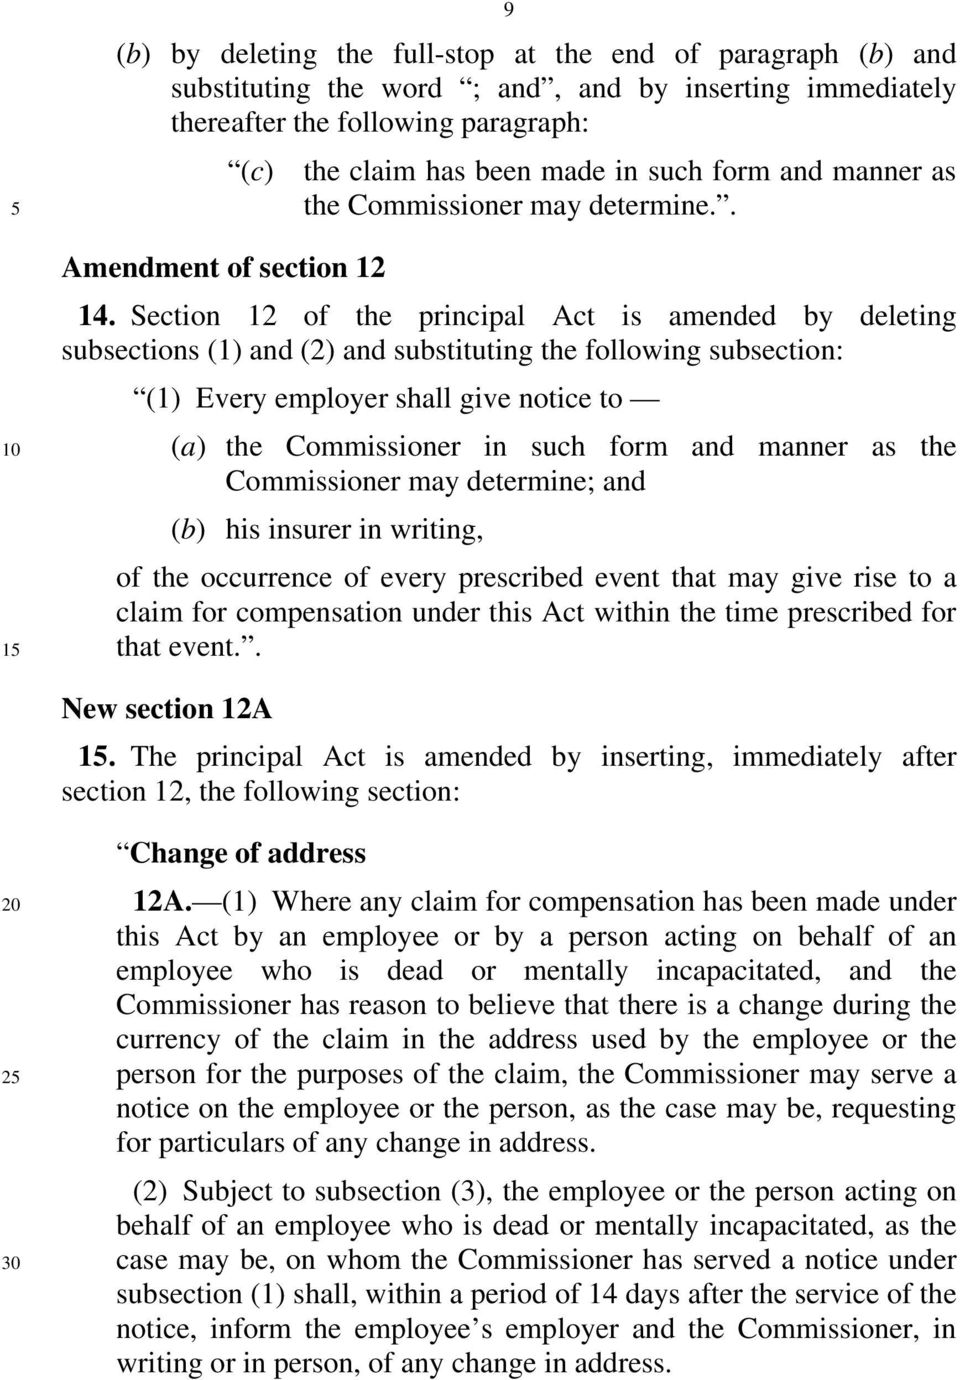 Section 12 of the principal Act is amended by deleting subsections (1) and (2) and substituting the following subsection: (1) Every employer shall give notice to (a) the Commissioner in such form and